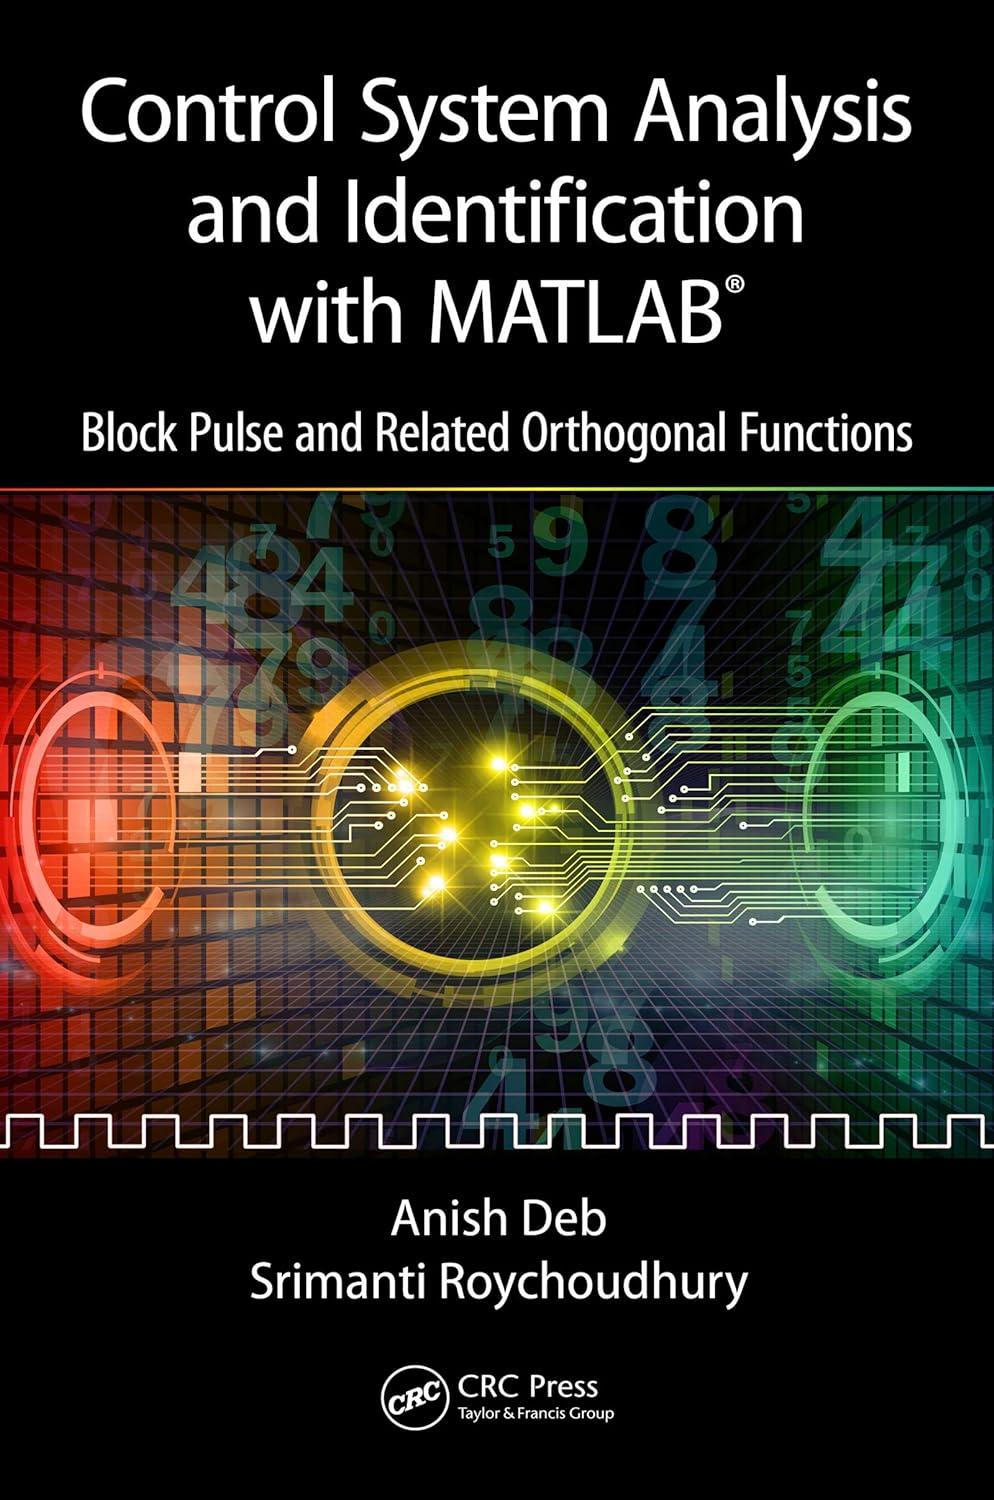 Control System Analysis And Identification With MATLAB Block Pulse And Related Orthogonal Functions